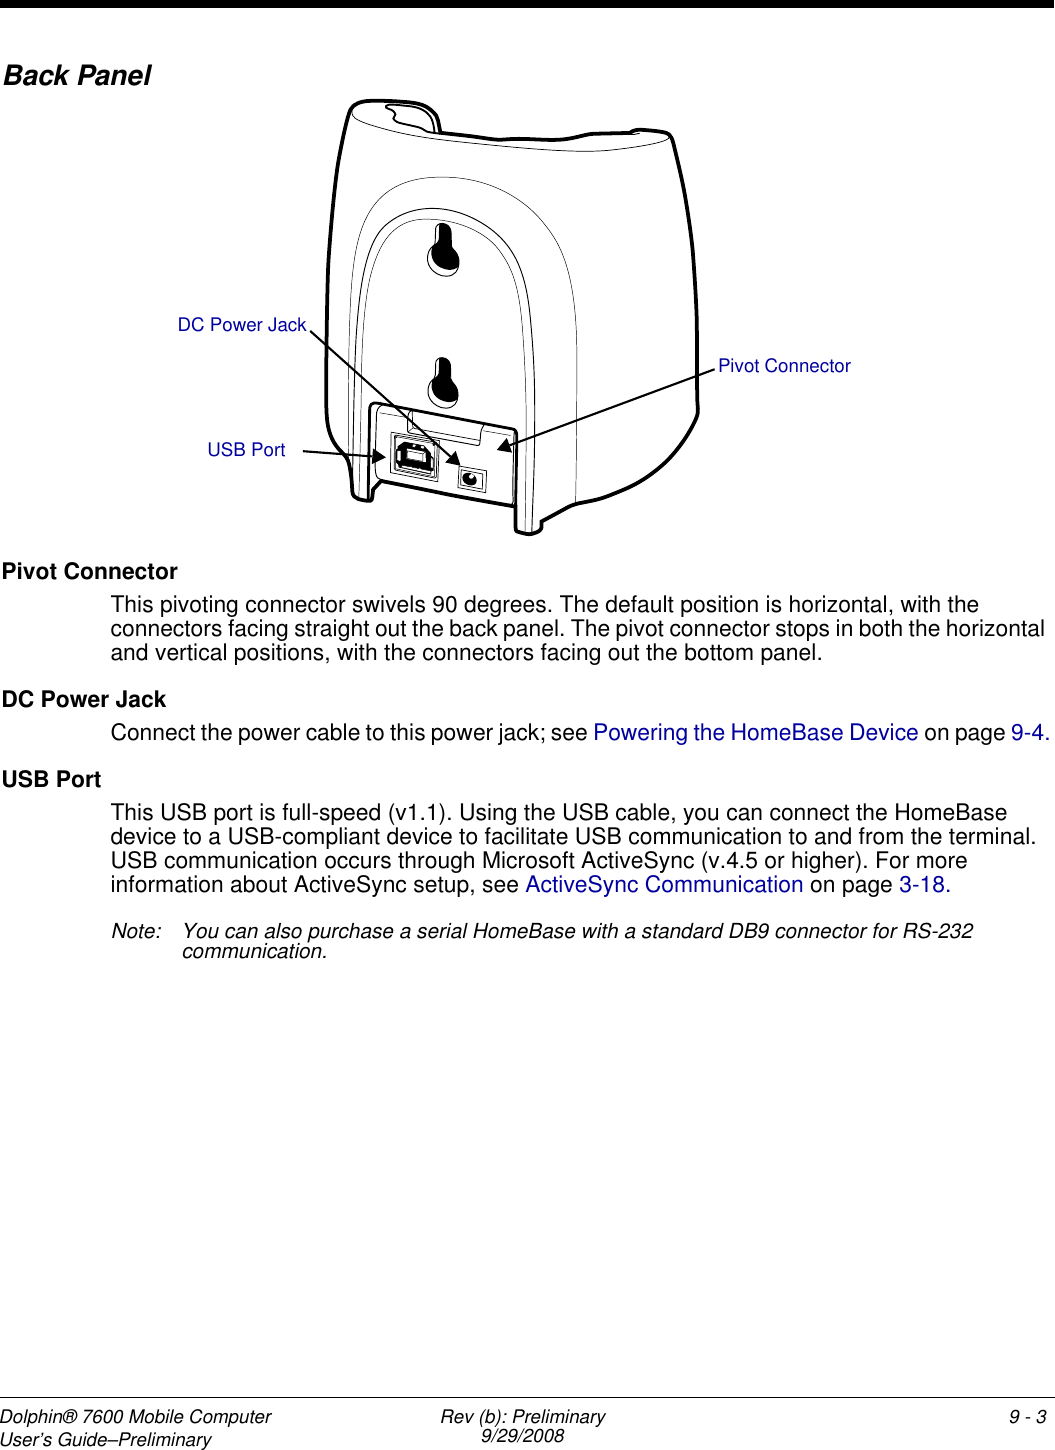 Dolphin® 7600 Mobile Computer User’s Guide–Preliminary Rev (b): Preliminary9/29/2008 9 - 19Dolphin HomeBase DeviceOverviewThe Dolphin HomeBase device is a charging and communication cradle that supports full-speed USB 1.1 communication with a workstation. You can also purchase a serial RS-232 HomeBase device.Battery ChargingThe HomeBase device completes a full charge of the main battery pack in less than four hours. In addition to charging, the HomeBase device powers the intelligent battery charging system in the terminal that protects the battery from being damaged by overcharging. The terminal senses when a battery pack is fully charged and automatically switches to a trickle charge that maintains the battery at full capacity. As a result, terminals may be stored in the HomeBase device indefinitely without damage to the terminals, battery packs, or peripherals. CommunicationThe HomeBase device can communicate via USB or serial RS-232. Data transmission for USB is up to 12 Mbps. Data transmission for serial RS-232 is up to 115 Kbps. HomeBase devices cannot be physically connected to each other–sometimes referred to as “daisy-chaining”–but can be networked together via serial or USB hubs.Convenient Storage The battery charging system makes the HomeBase device a safe and convenient storage receptacle for your terminal.CapacityThe HomeBase device holds one terminal and charges its battery pack. Power SupplyThe power cable that ships with each unit also powers the HomeBase device.Use only the peripherals, power cables, and power adapters from Honeywell. Use of peripherals, cables, or power adapters not sold/manufactured by Honeywell may cause damage not covered by the warranty.Use only the Li-ion battery packs provided by Honeywell. Use of any battery not sold/manufactured by Honeywell may result in damage not covered by the warranty. !!